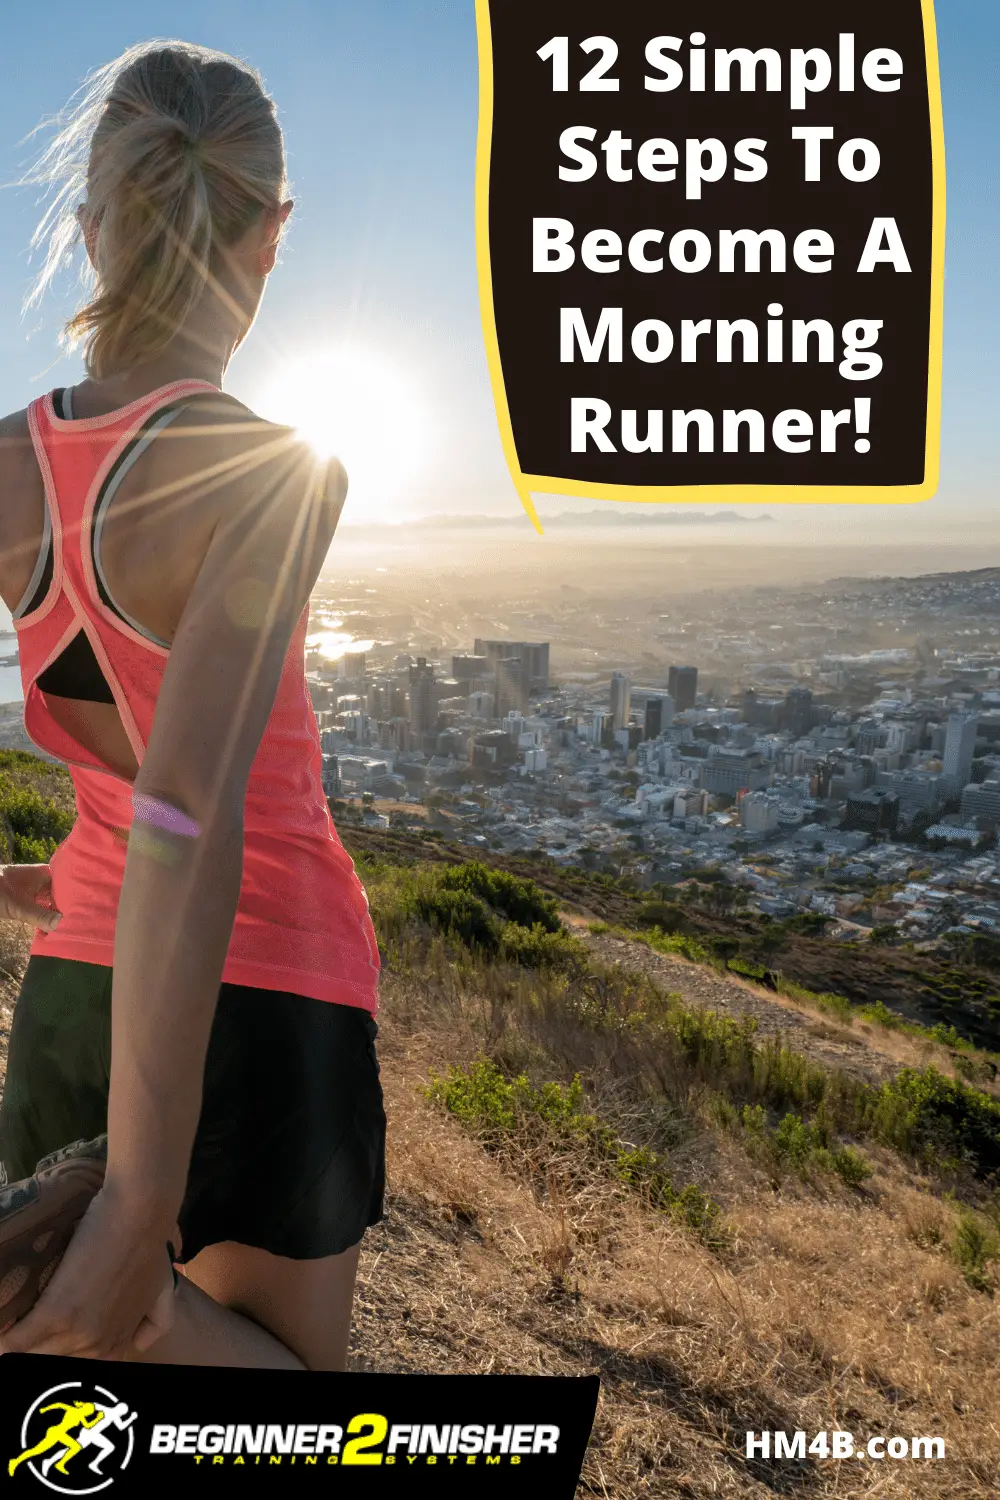 How To Become A Morning Runner - 12 Simple Steps!